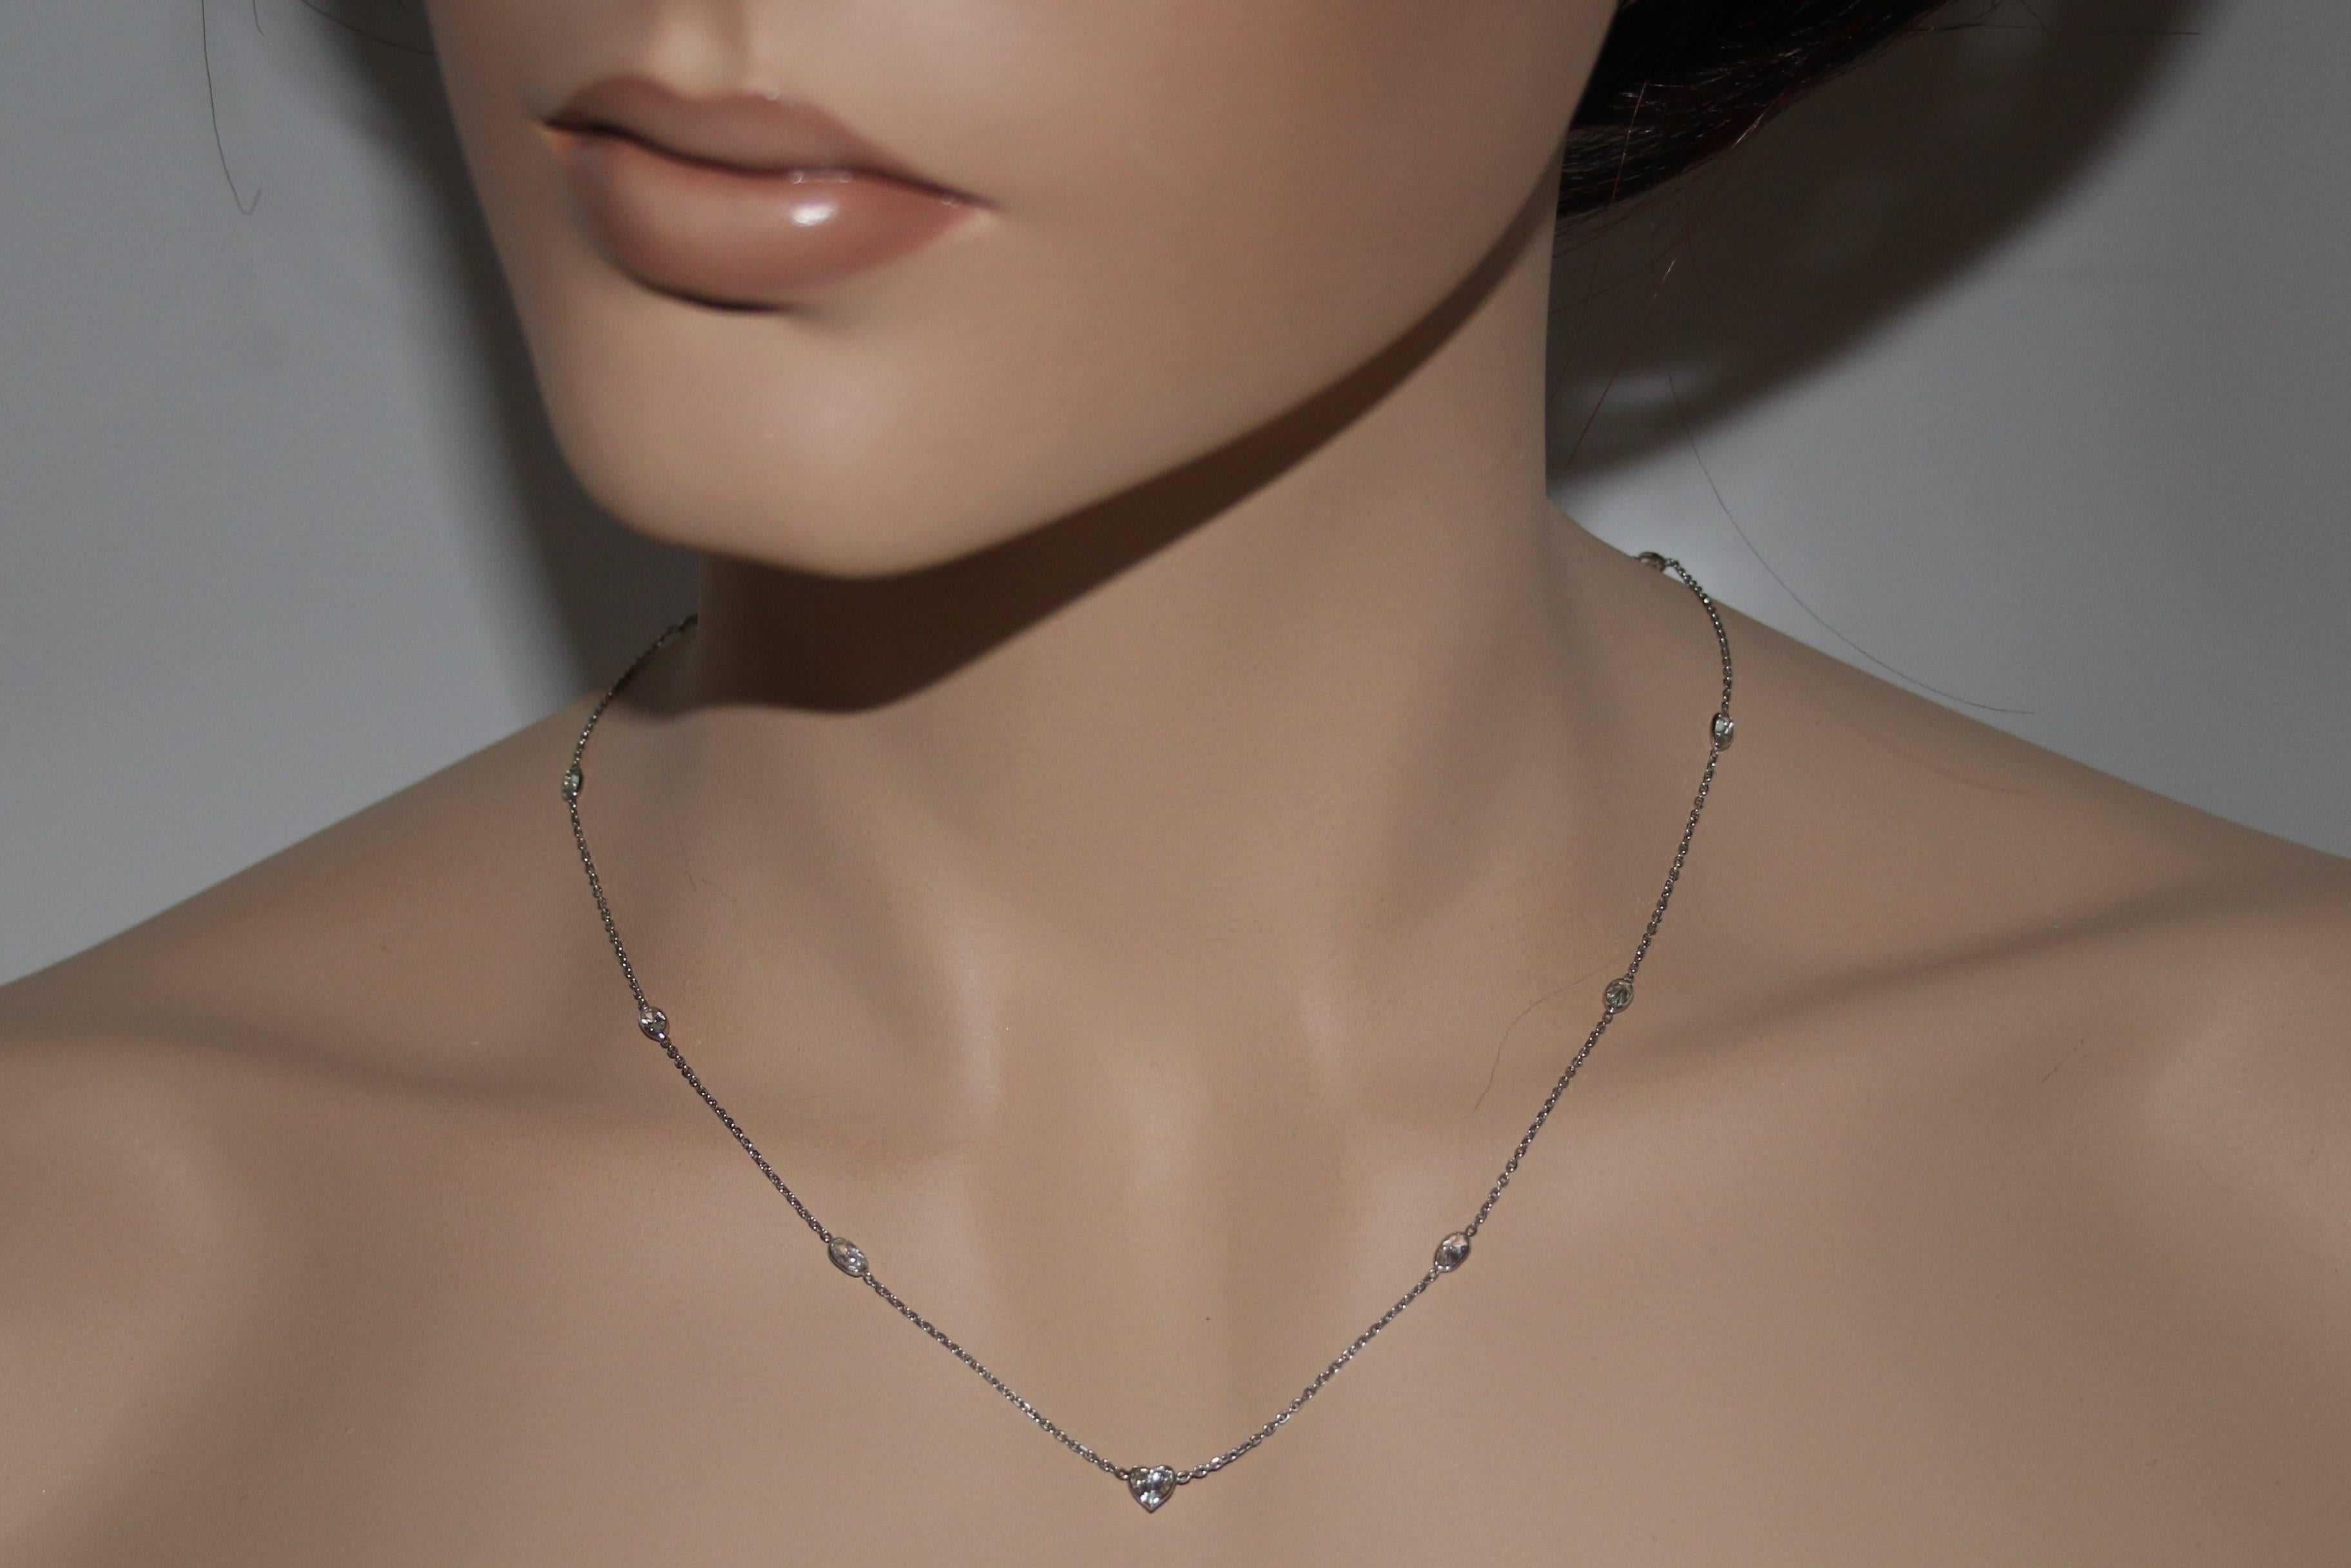 Very Unusual Diamond Necklace
The necklace is 14K White Gold
The stones are oval shaped with a Heart Shaped Center
The center stone is Heart Shape 0.37 Carats H SI
The other stones are oval shaped 1.48 Carats H SI
The necklace is 18